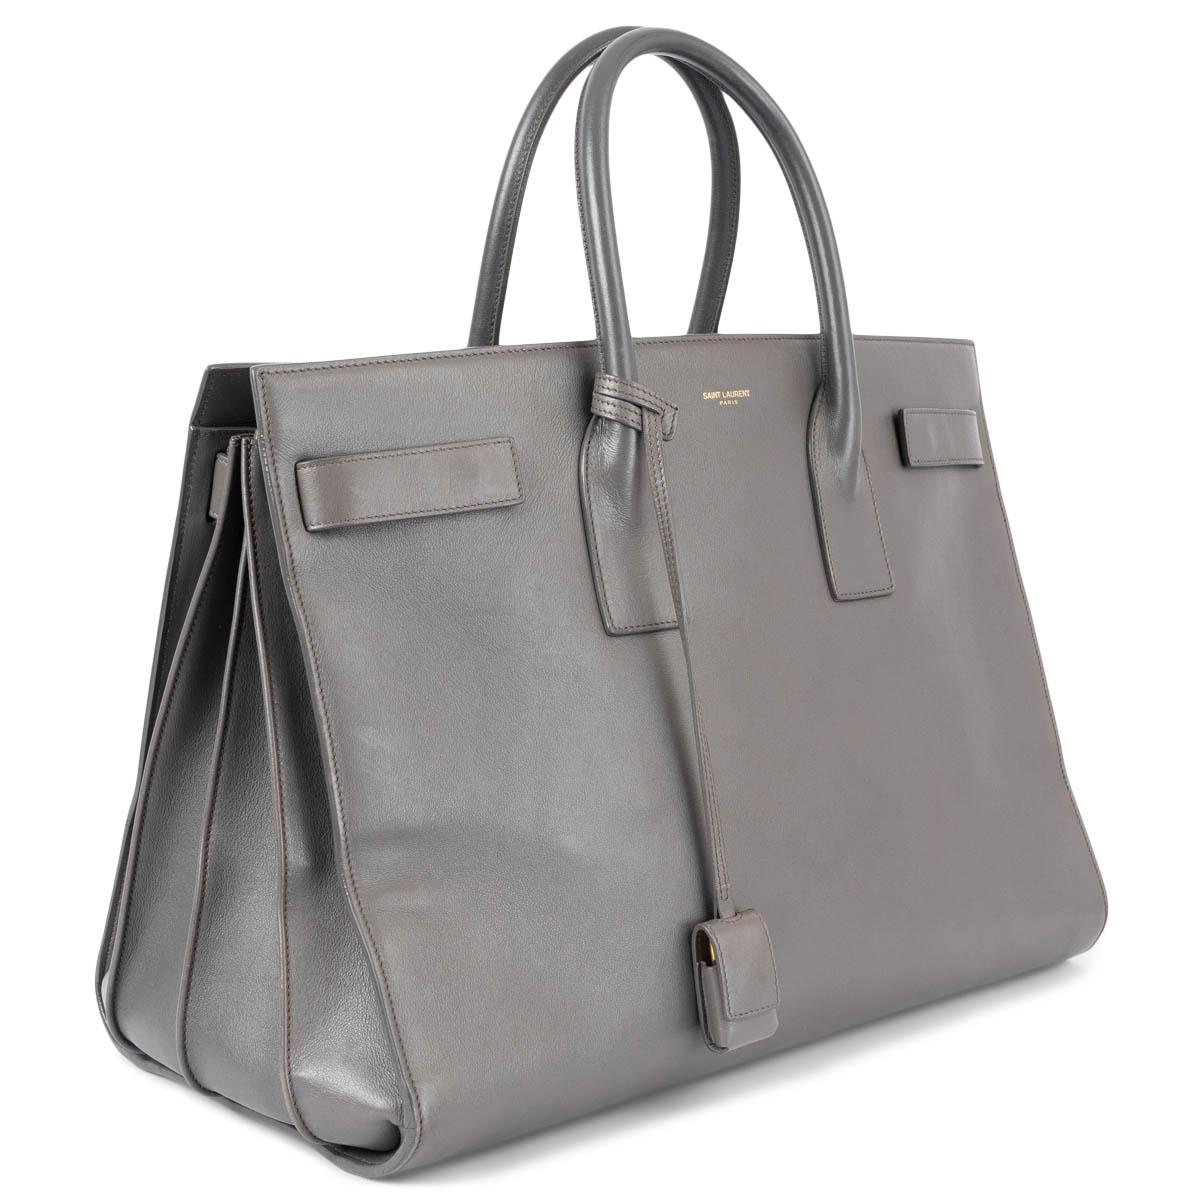 100% authentic Saint Laurent Large Sac de Jour in grey smooth leather with gold-tone hardware. The design features accordion sides, a detachable padlock in leather case and four snap tabs on the side. The interior is lined in grey suede and divided